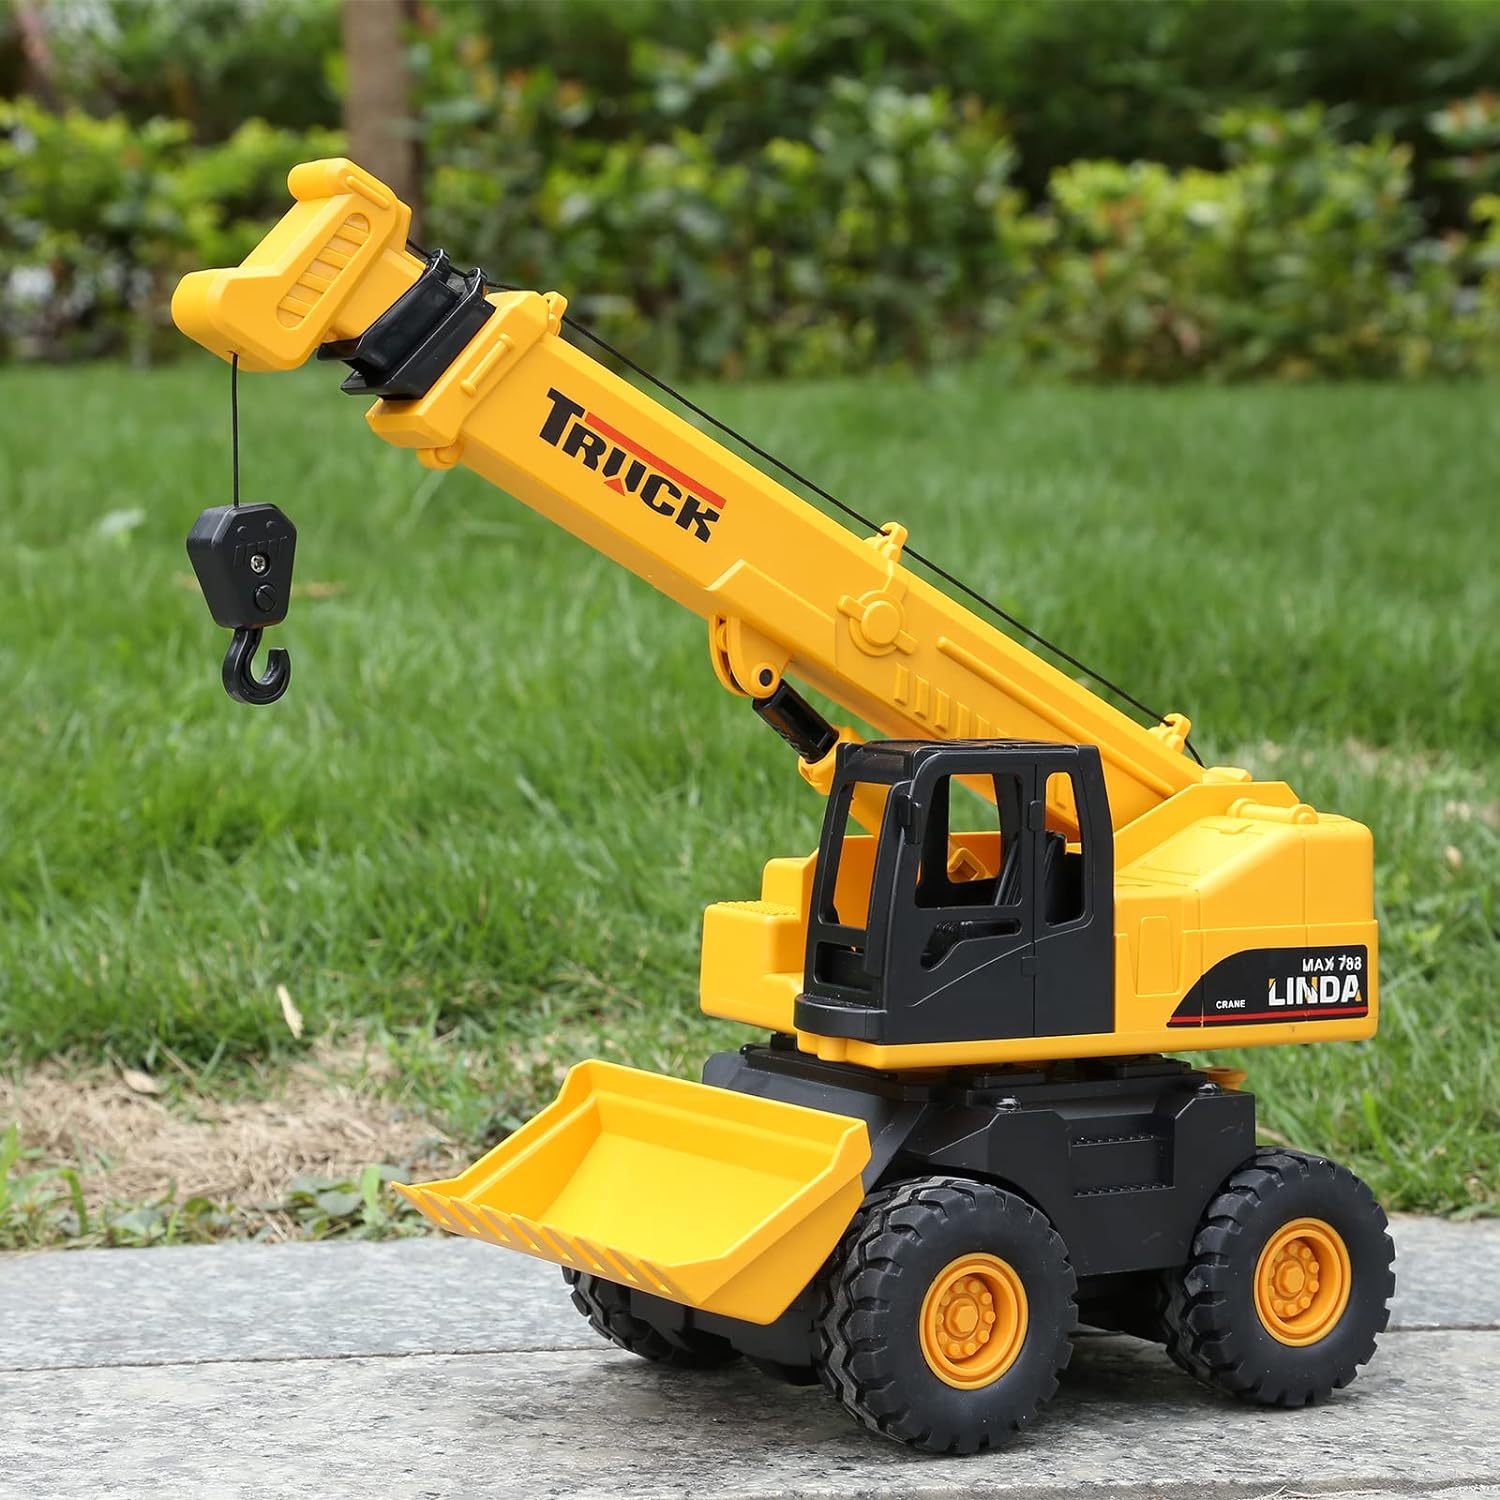 Read more about the article haomsj 2-in-1 Crane and Excavator Construction Truck Toy Vehicles Building Toy Set Review